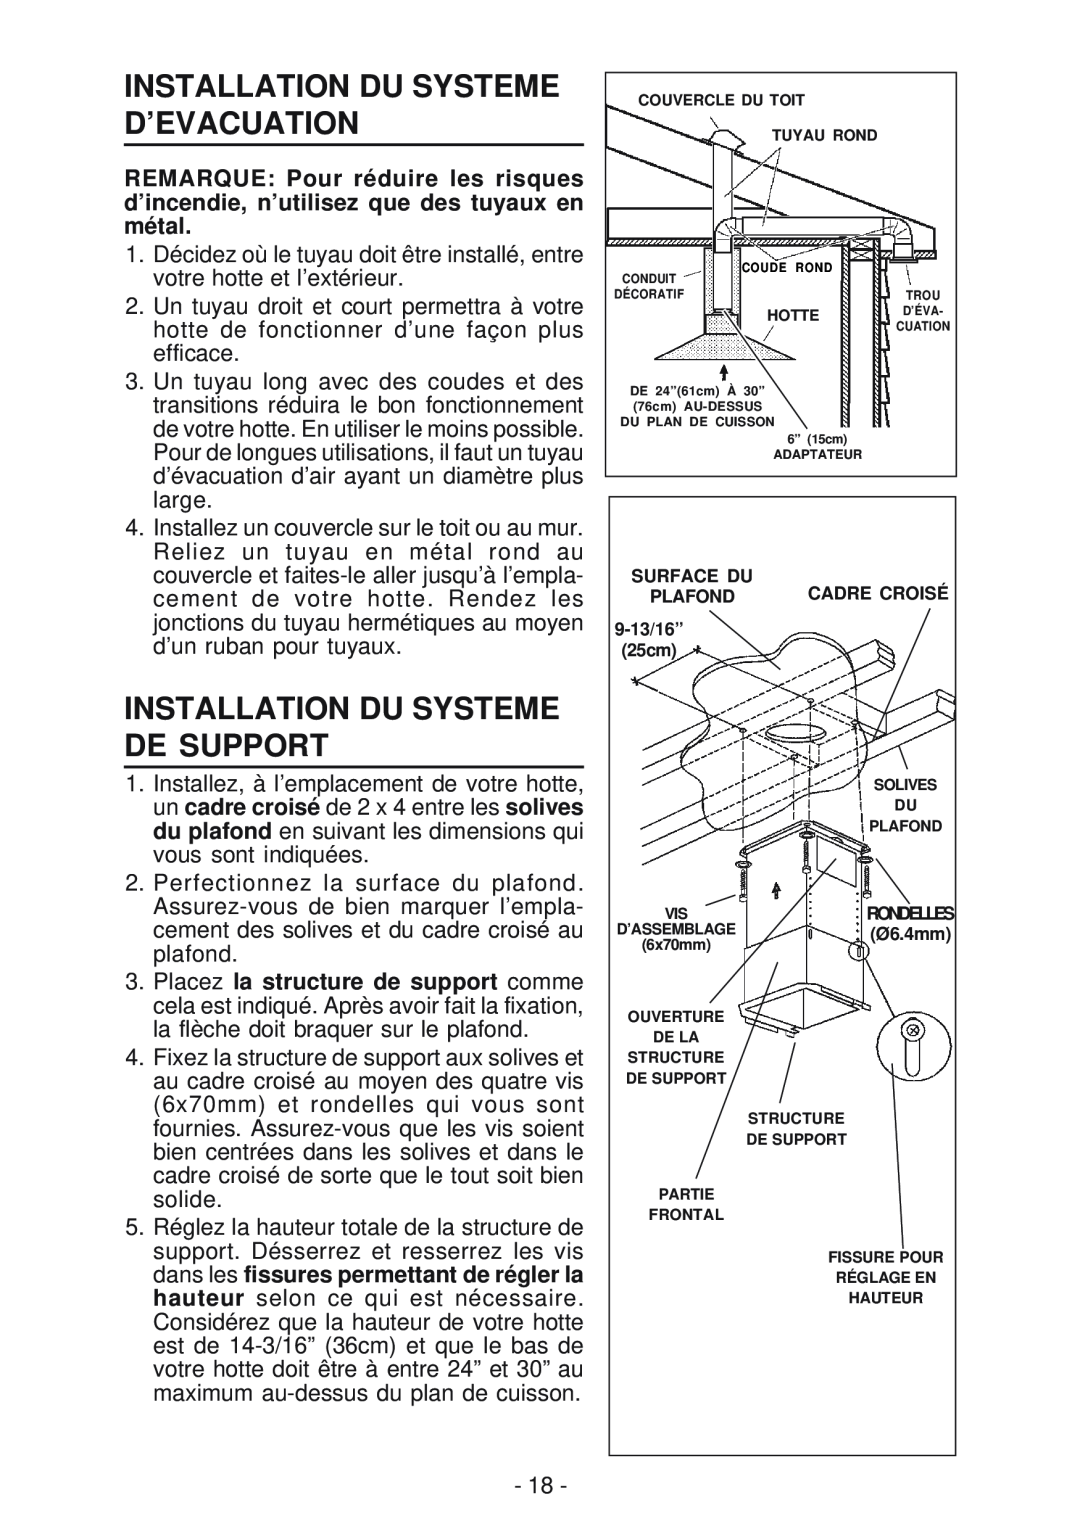 Best IS170 manual Installation Du Systeme D’Evacuation, Installation Du Systeme De Support 